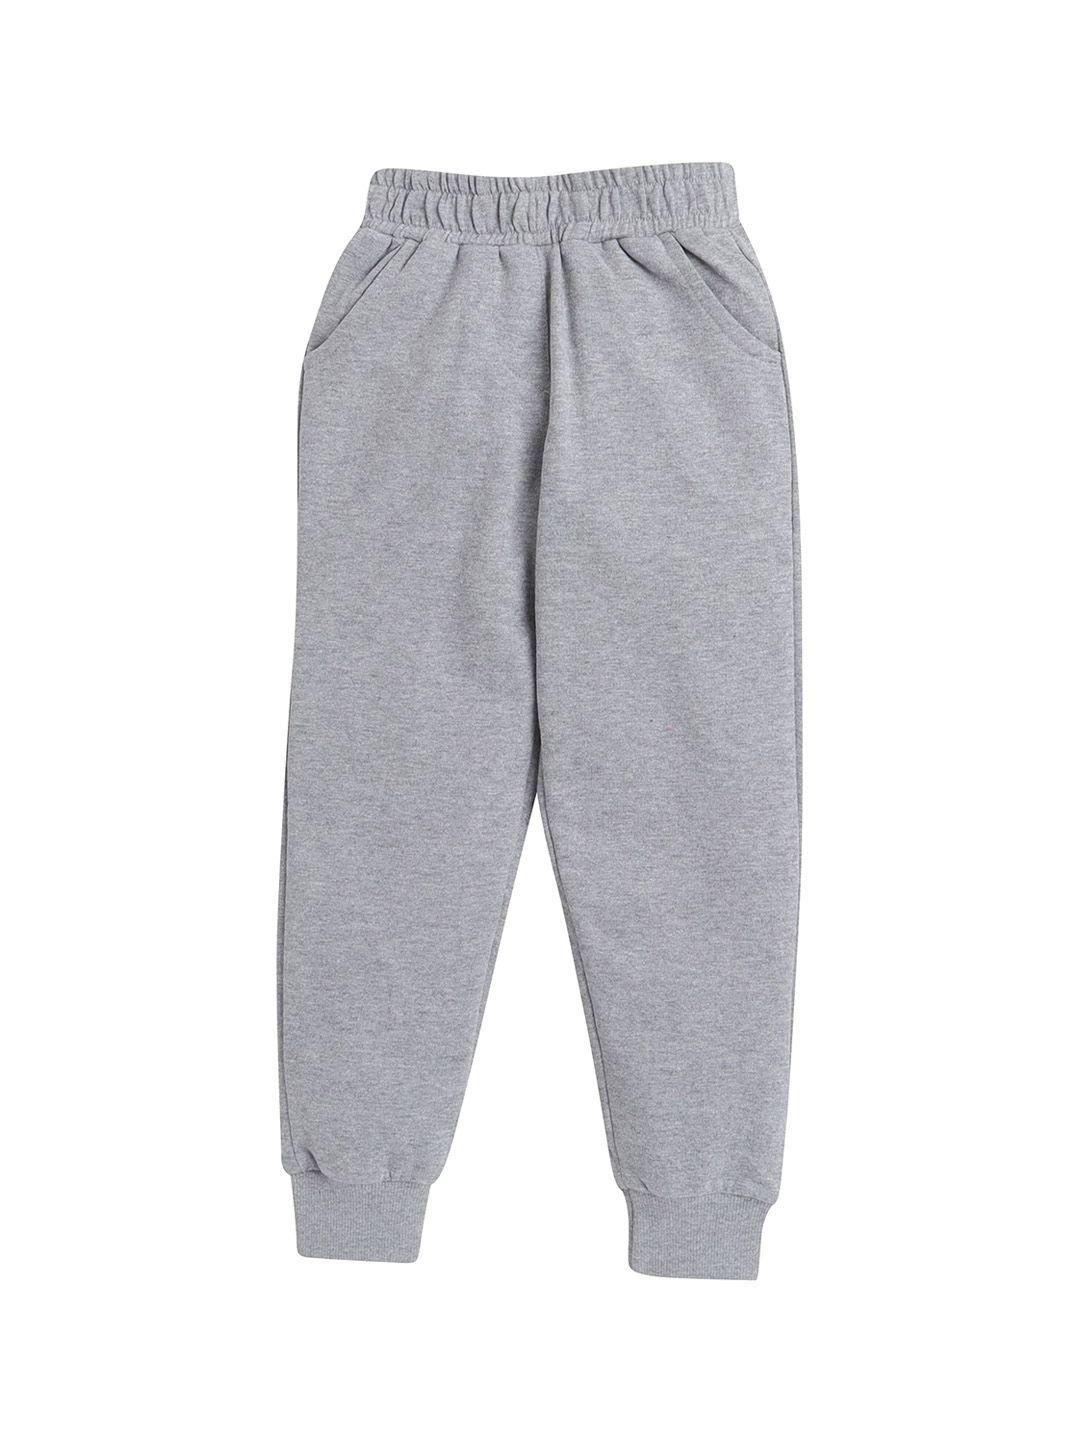 aww hunnie kids relaxed-fit cotton joggers